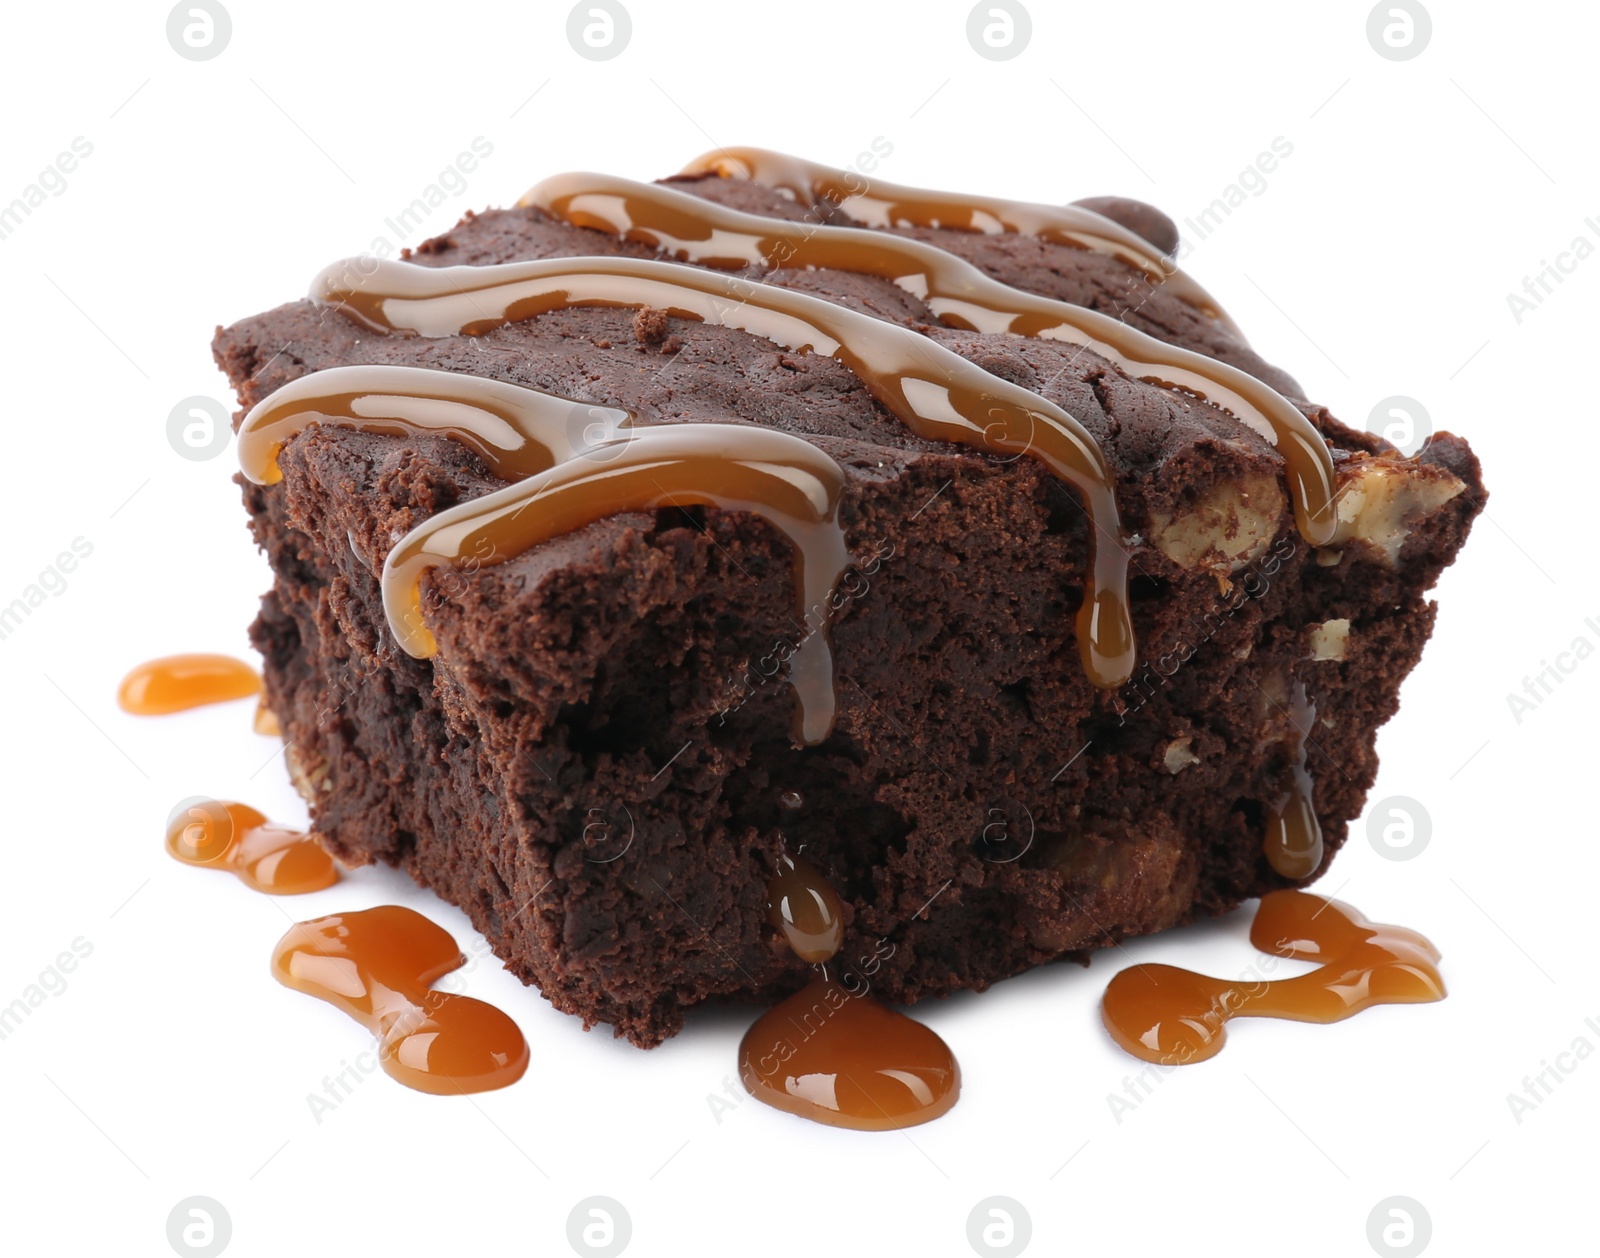 Photo of Delicious chocolate brownie with nuts and caramel sauce on white background